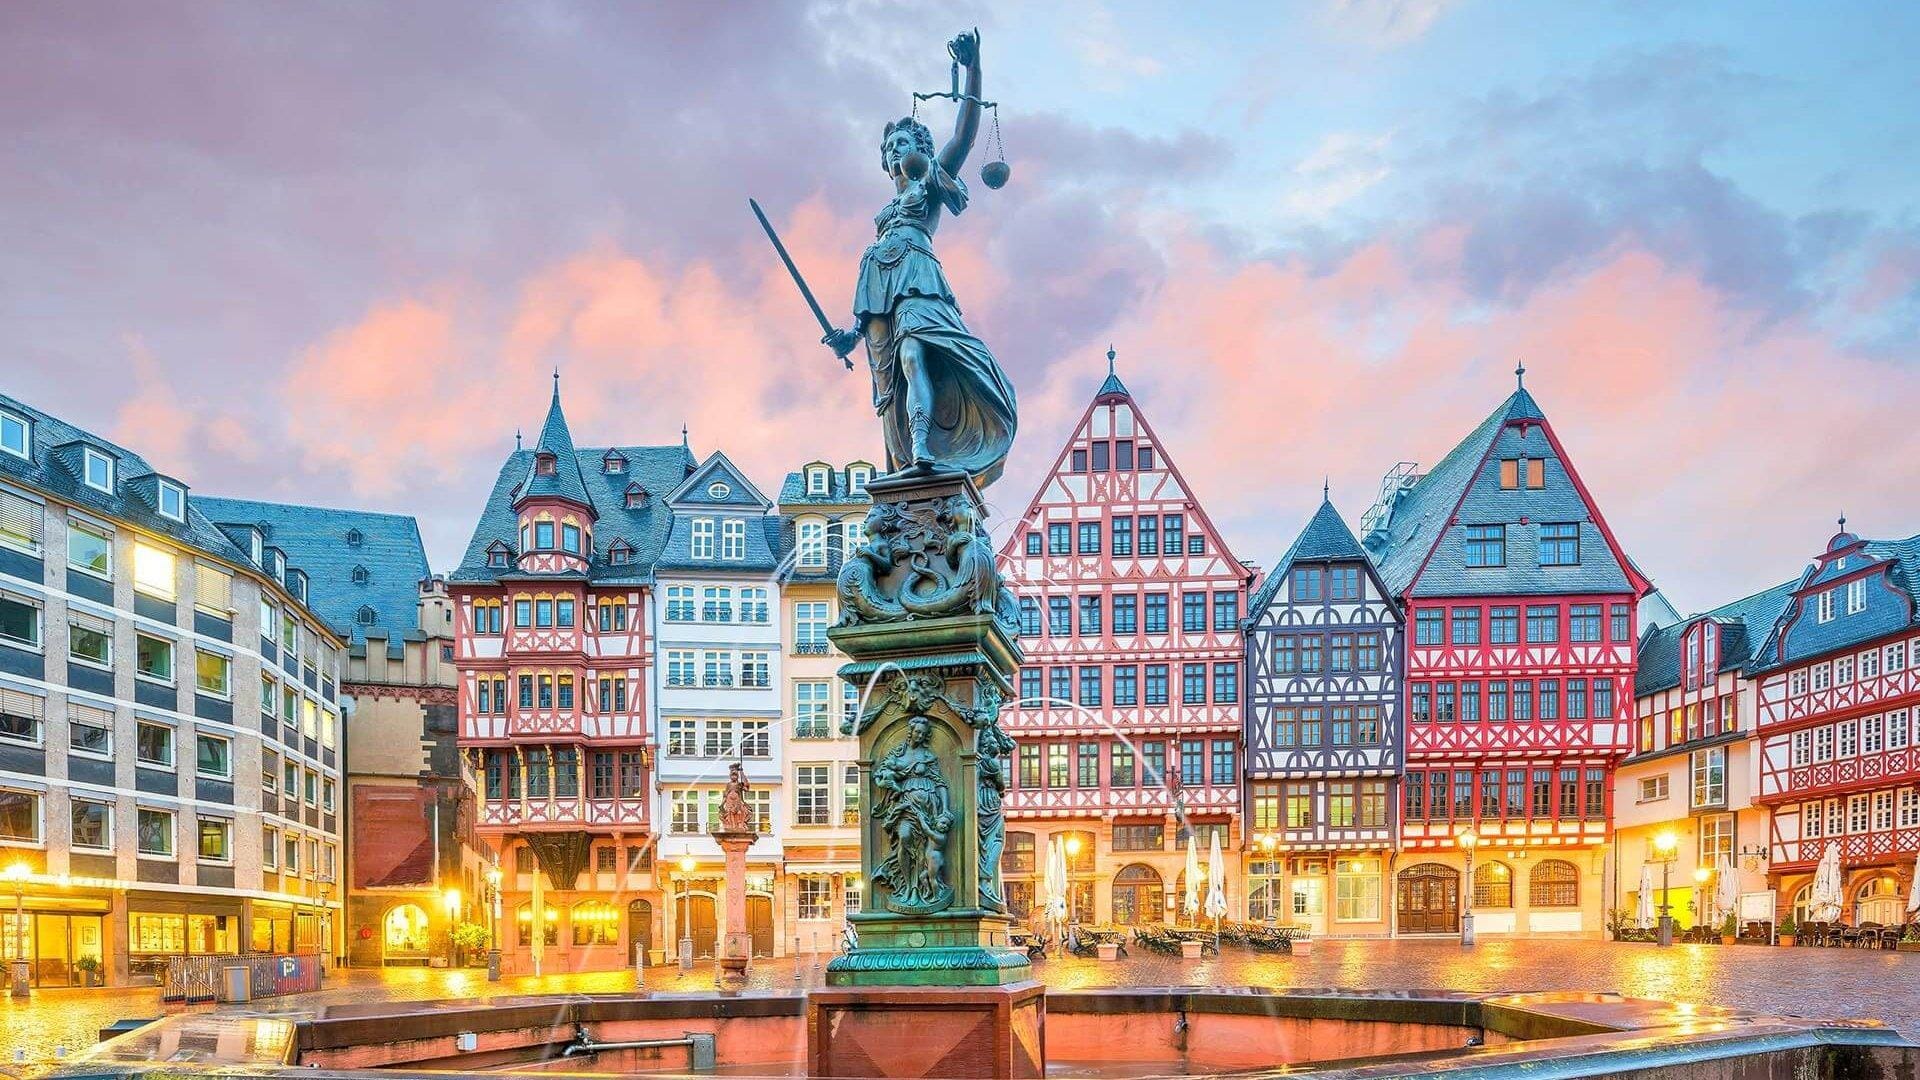 Visiting Germany with your partner? Take them to these places